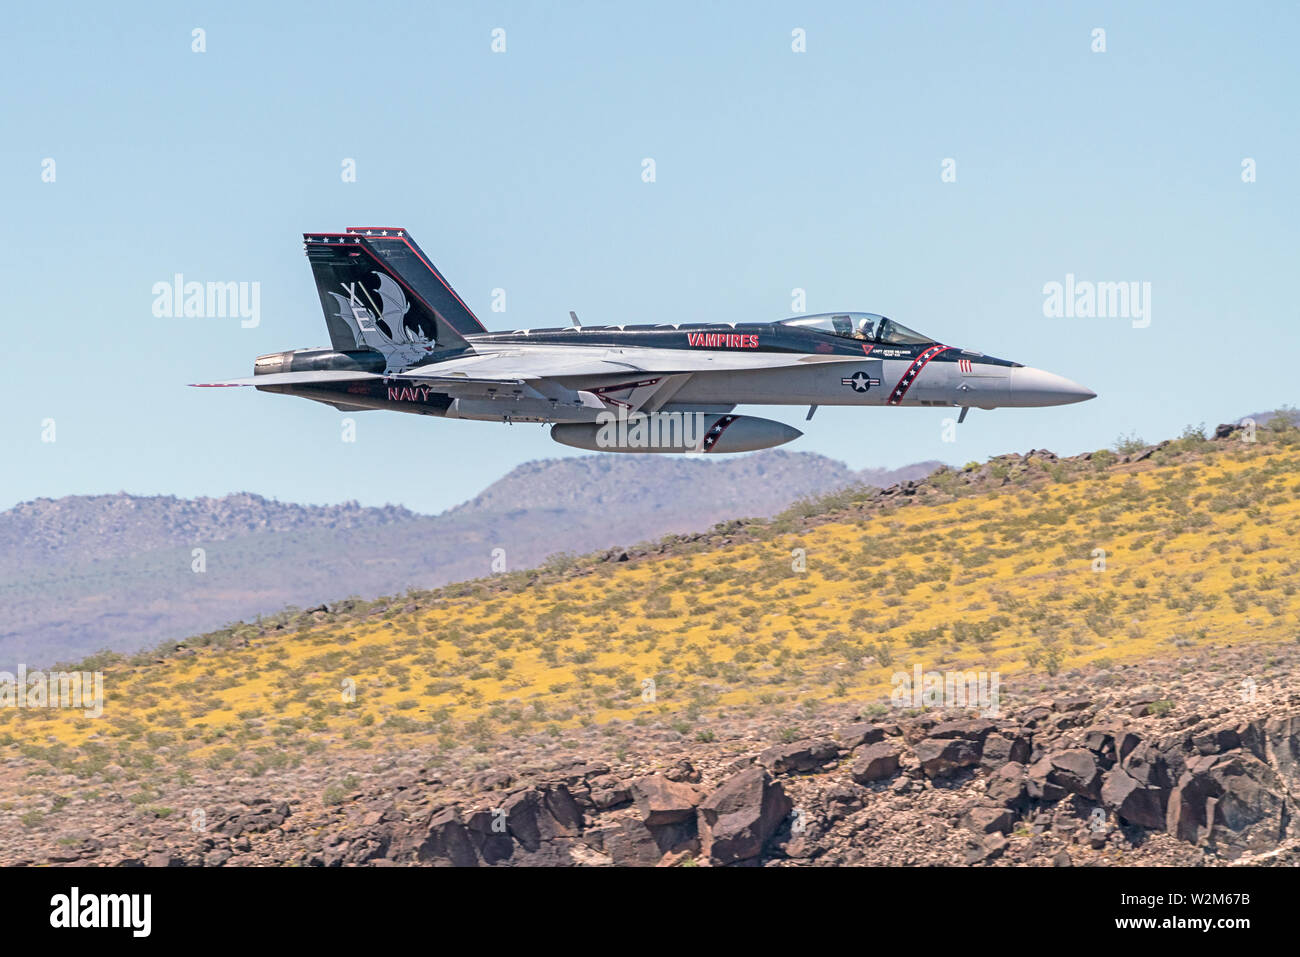 Airplane F-18 jet fighter flying at Star Wars Canyon at Death Valley, California Stock Photo